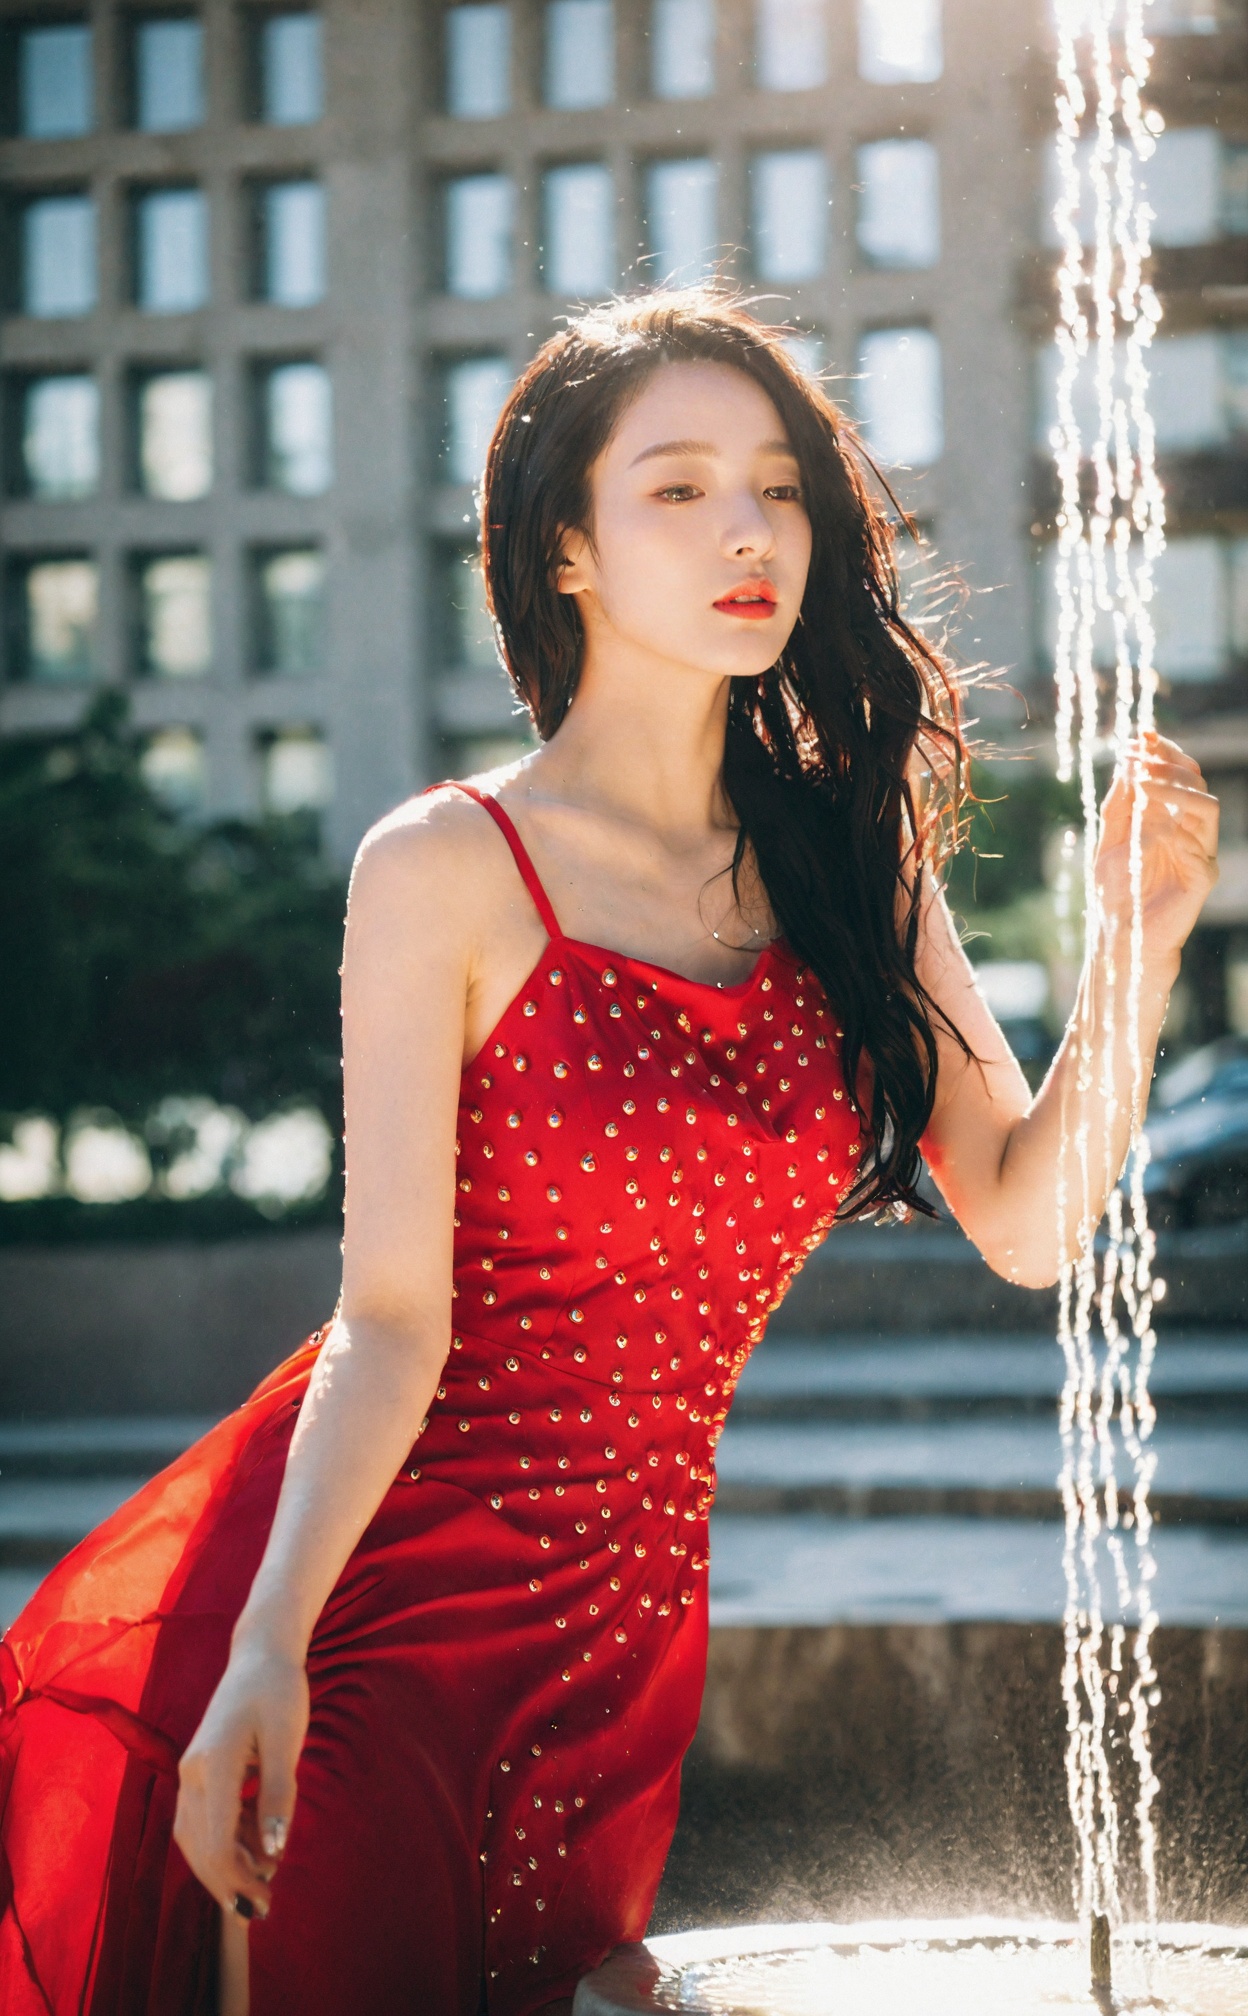 mugglelight, a woman in a red dress, posed near a city fountain with water droplets catching the sunlight, urban glamour, playful elegance.korean girl,black hair,